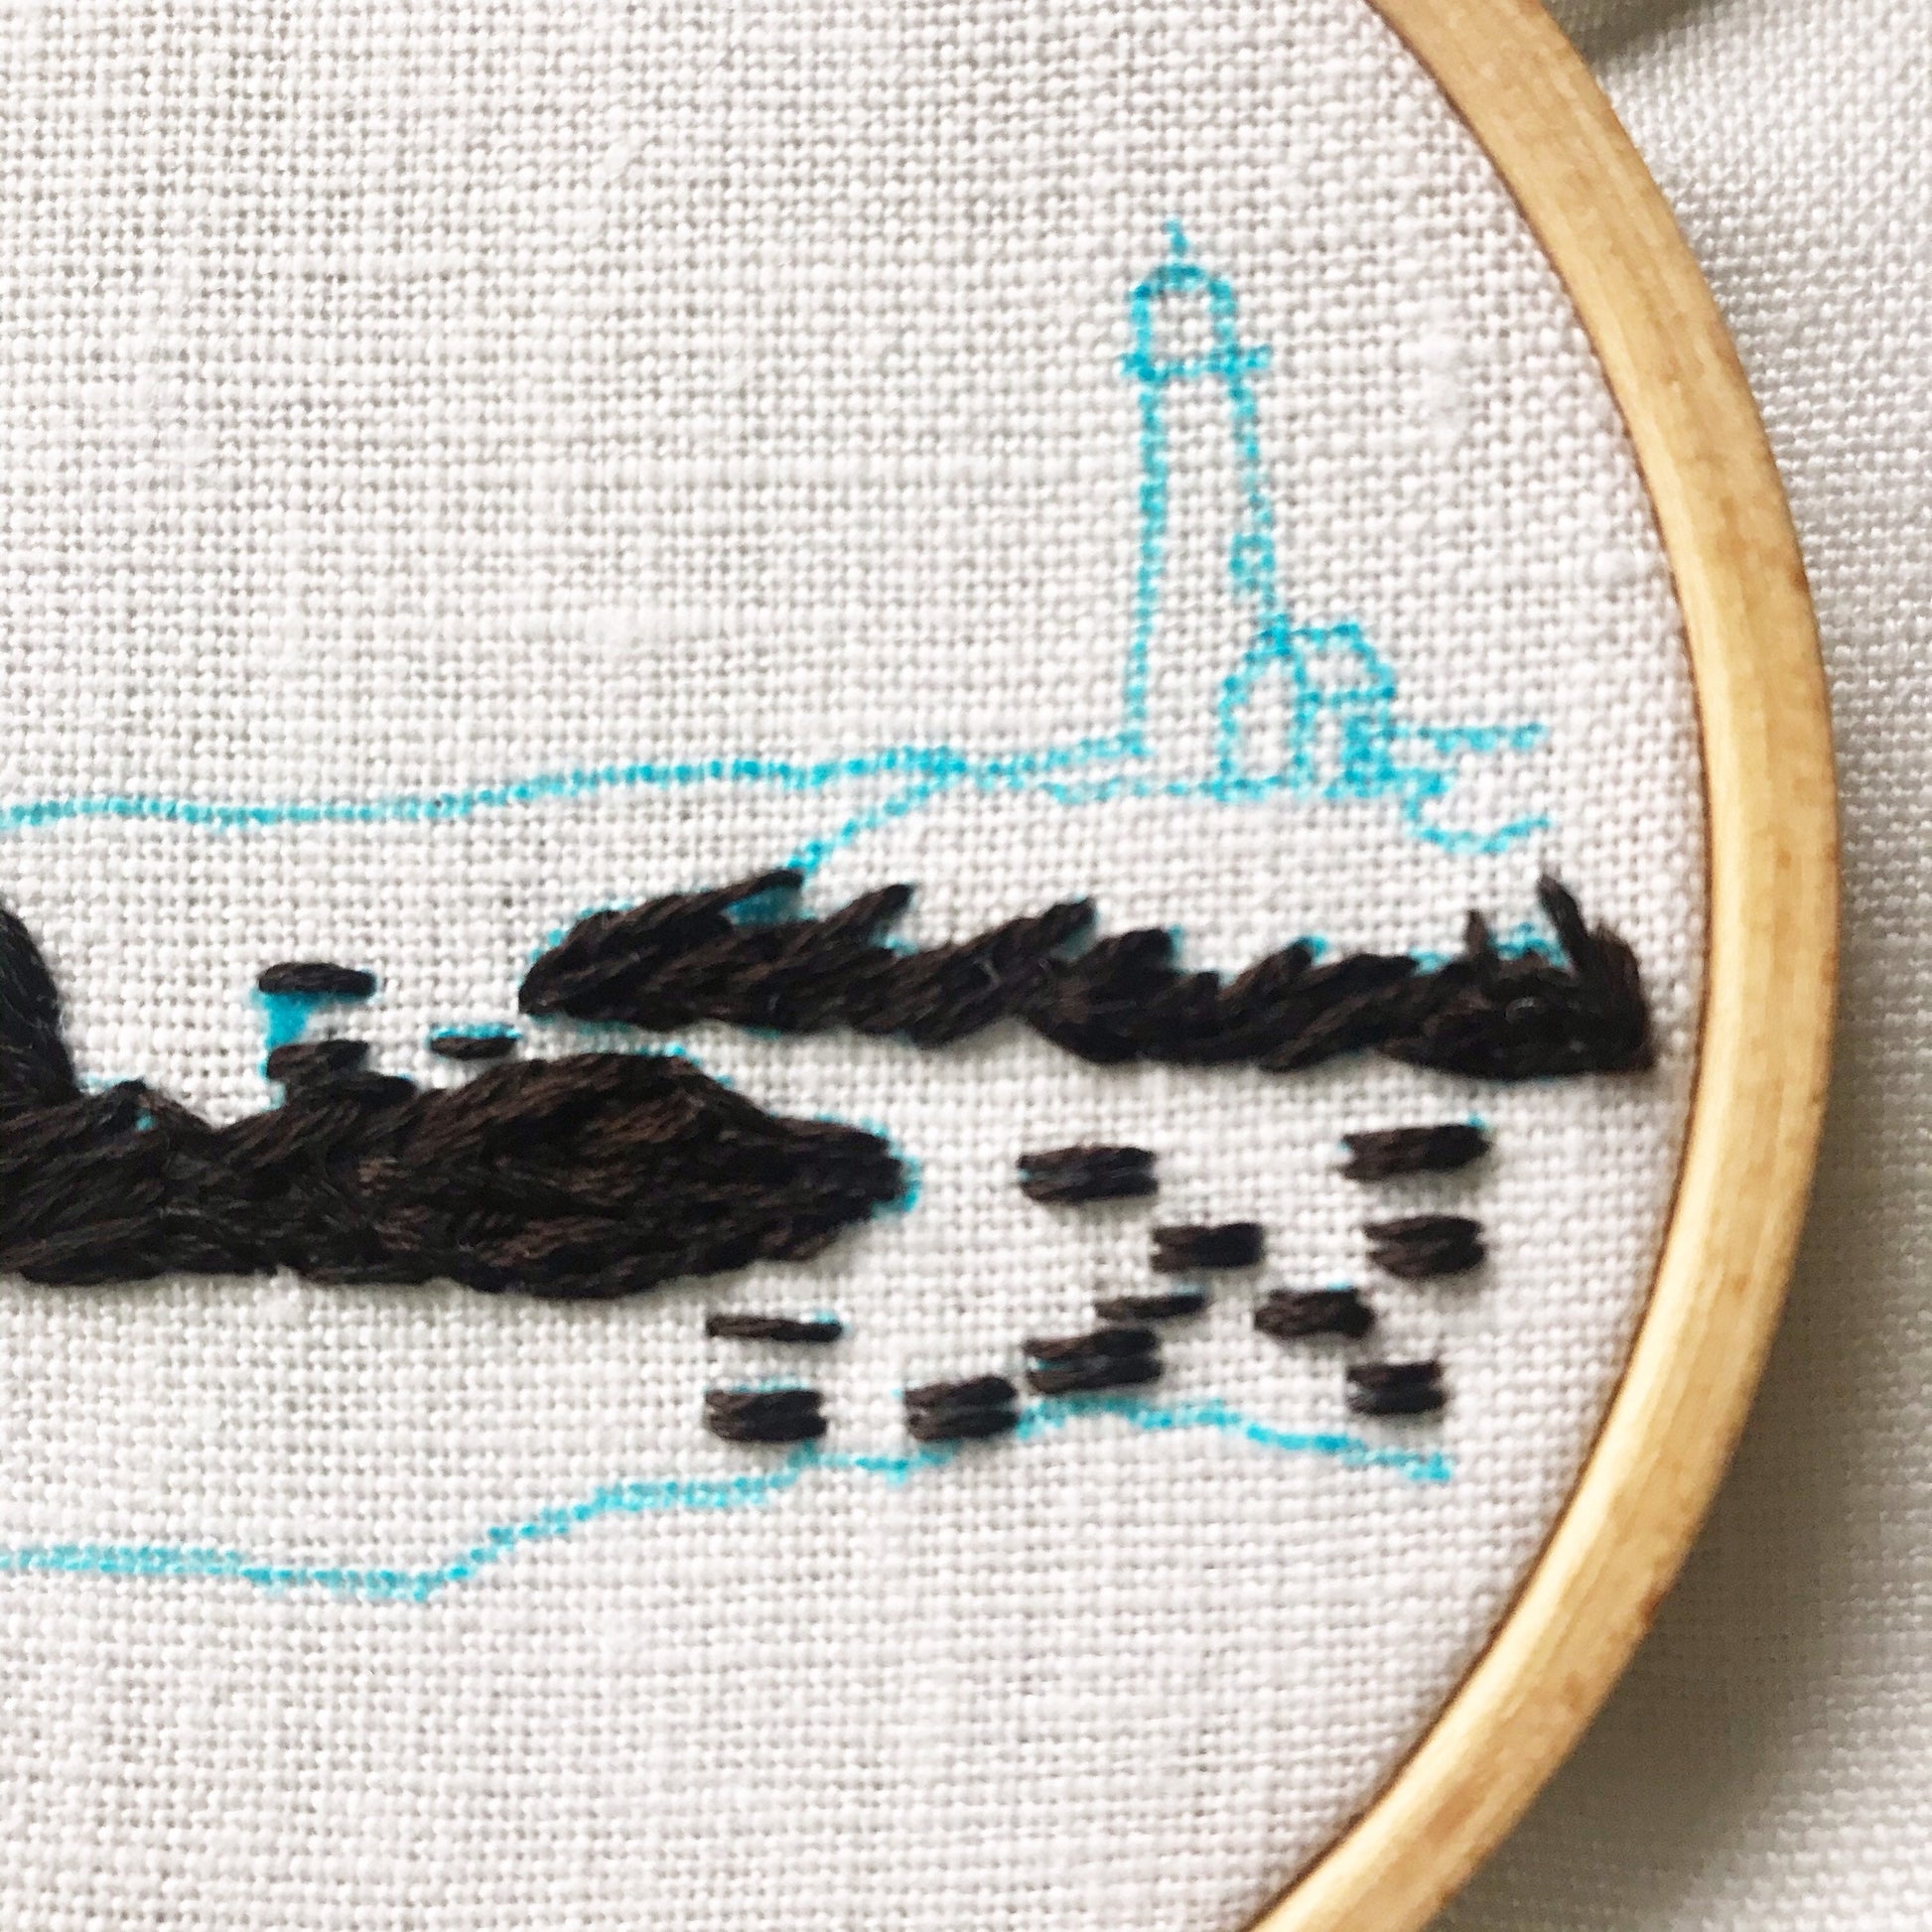 Orcas in the Sound: Beginner Embroidery Kit – Rosanna Diggs Embroidery